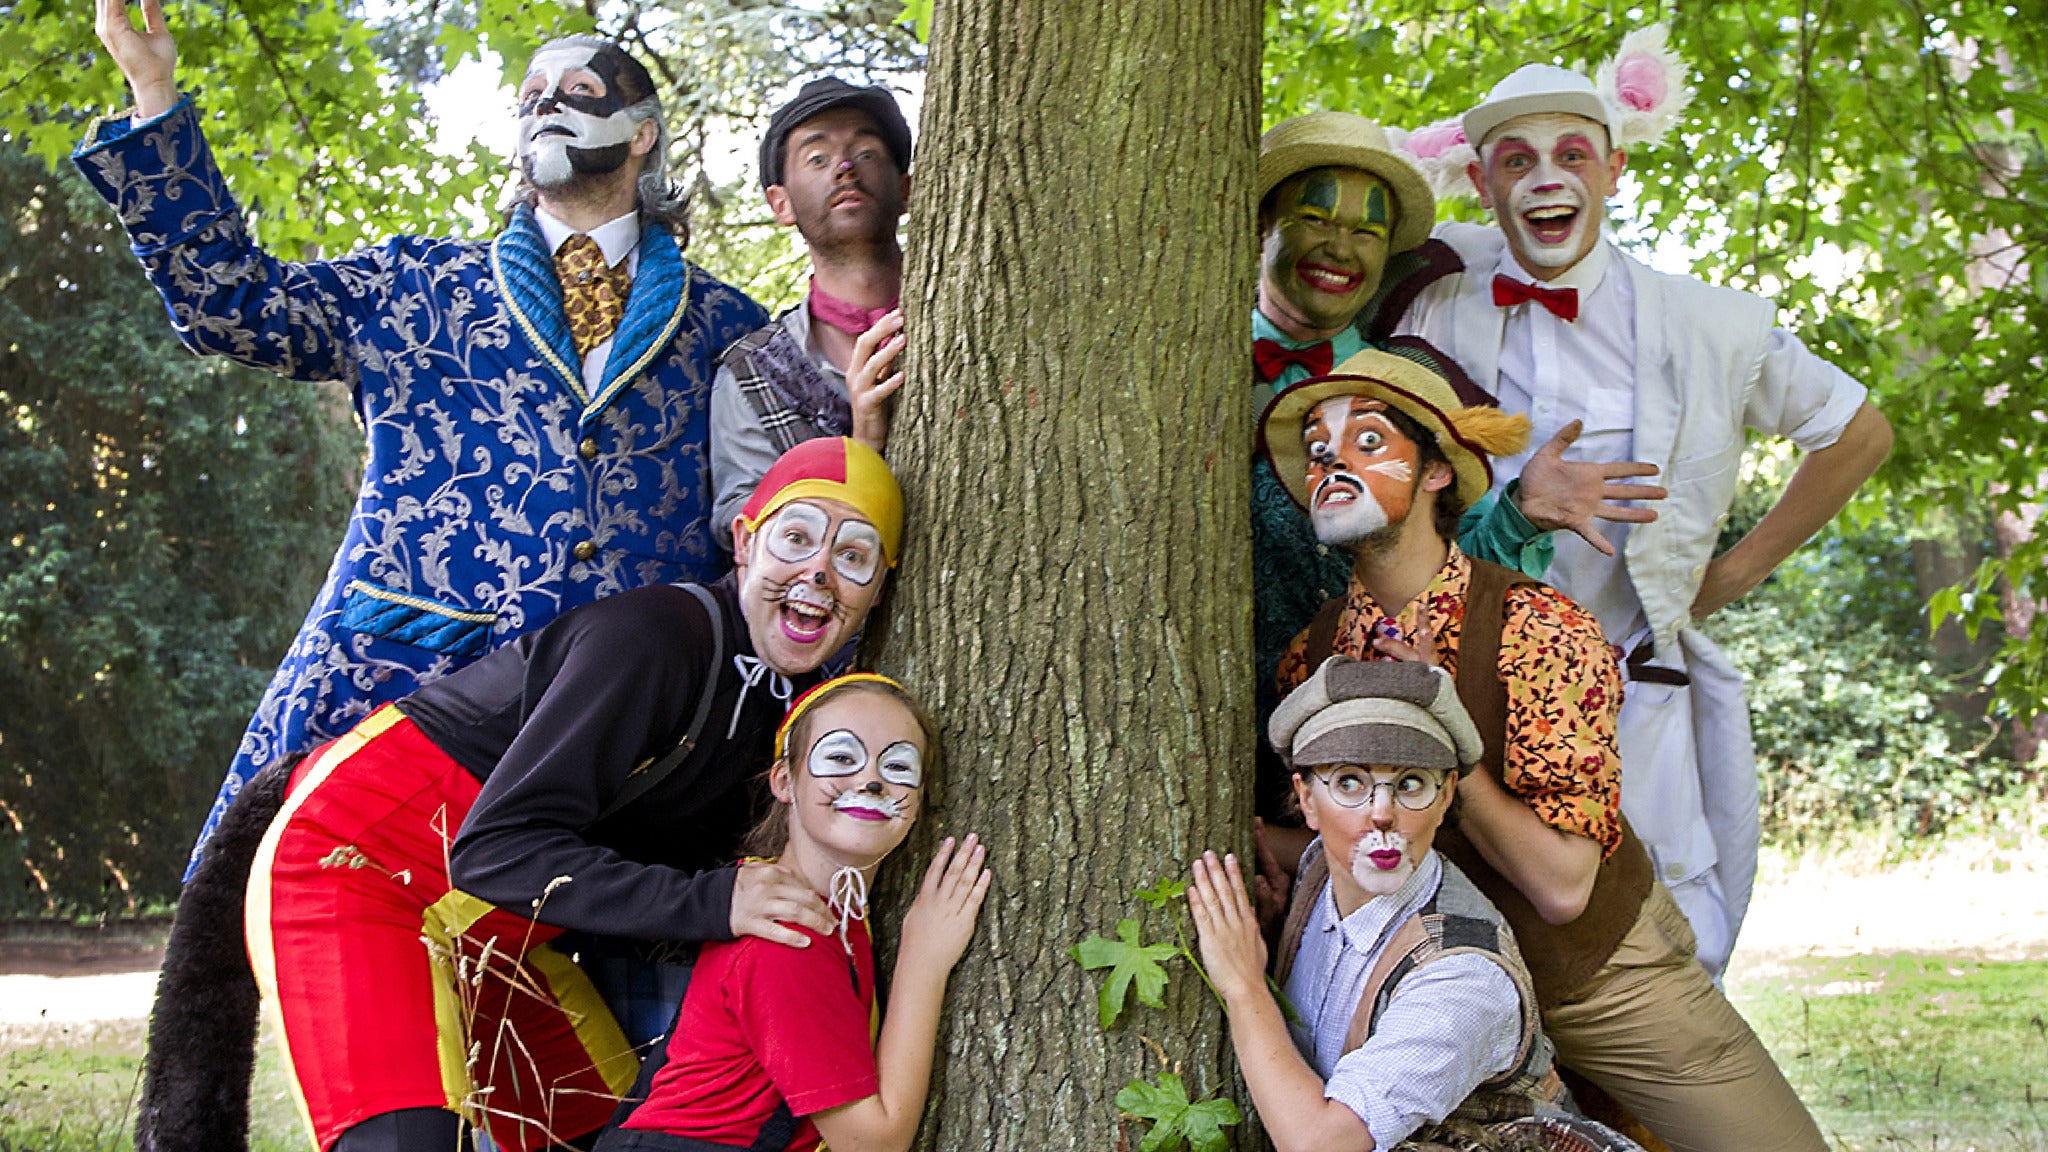 Image used with permission from Ticketmaster | Wind In the Willows tickets